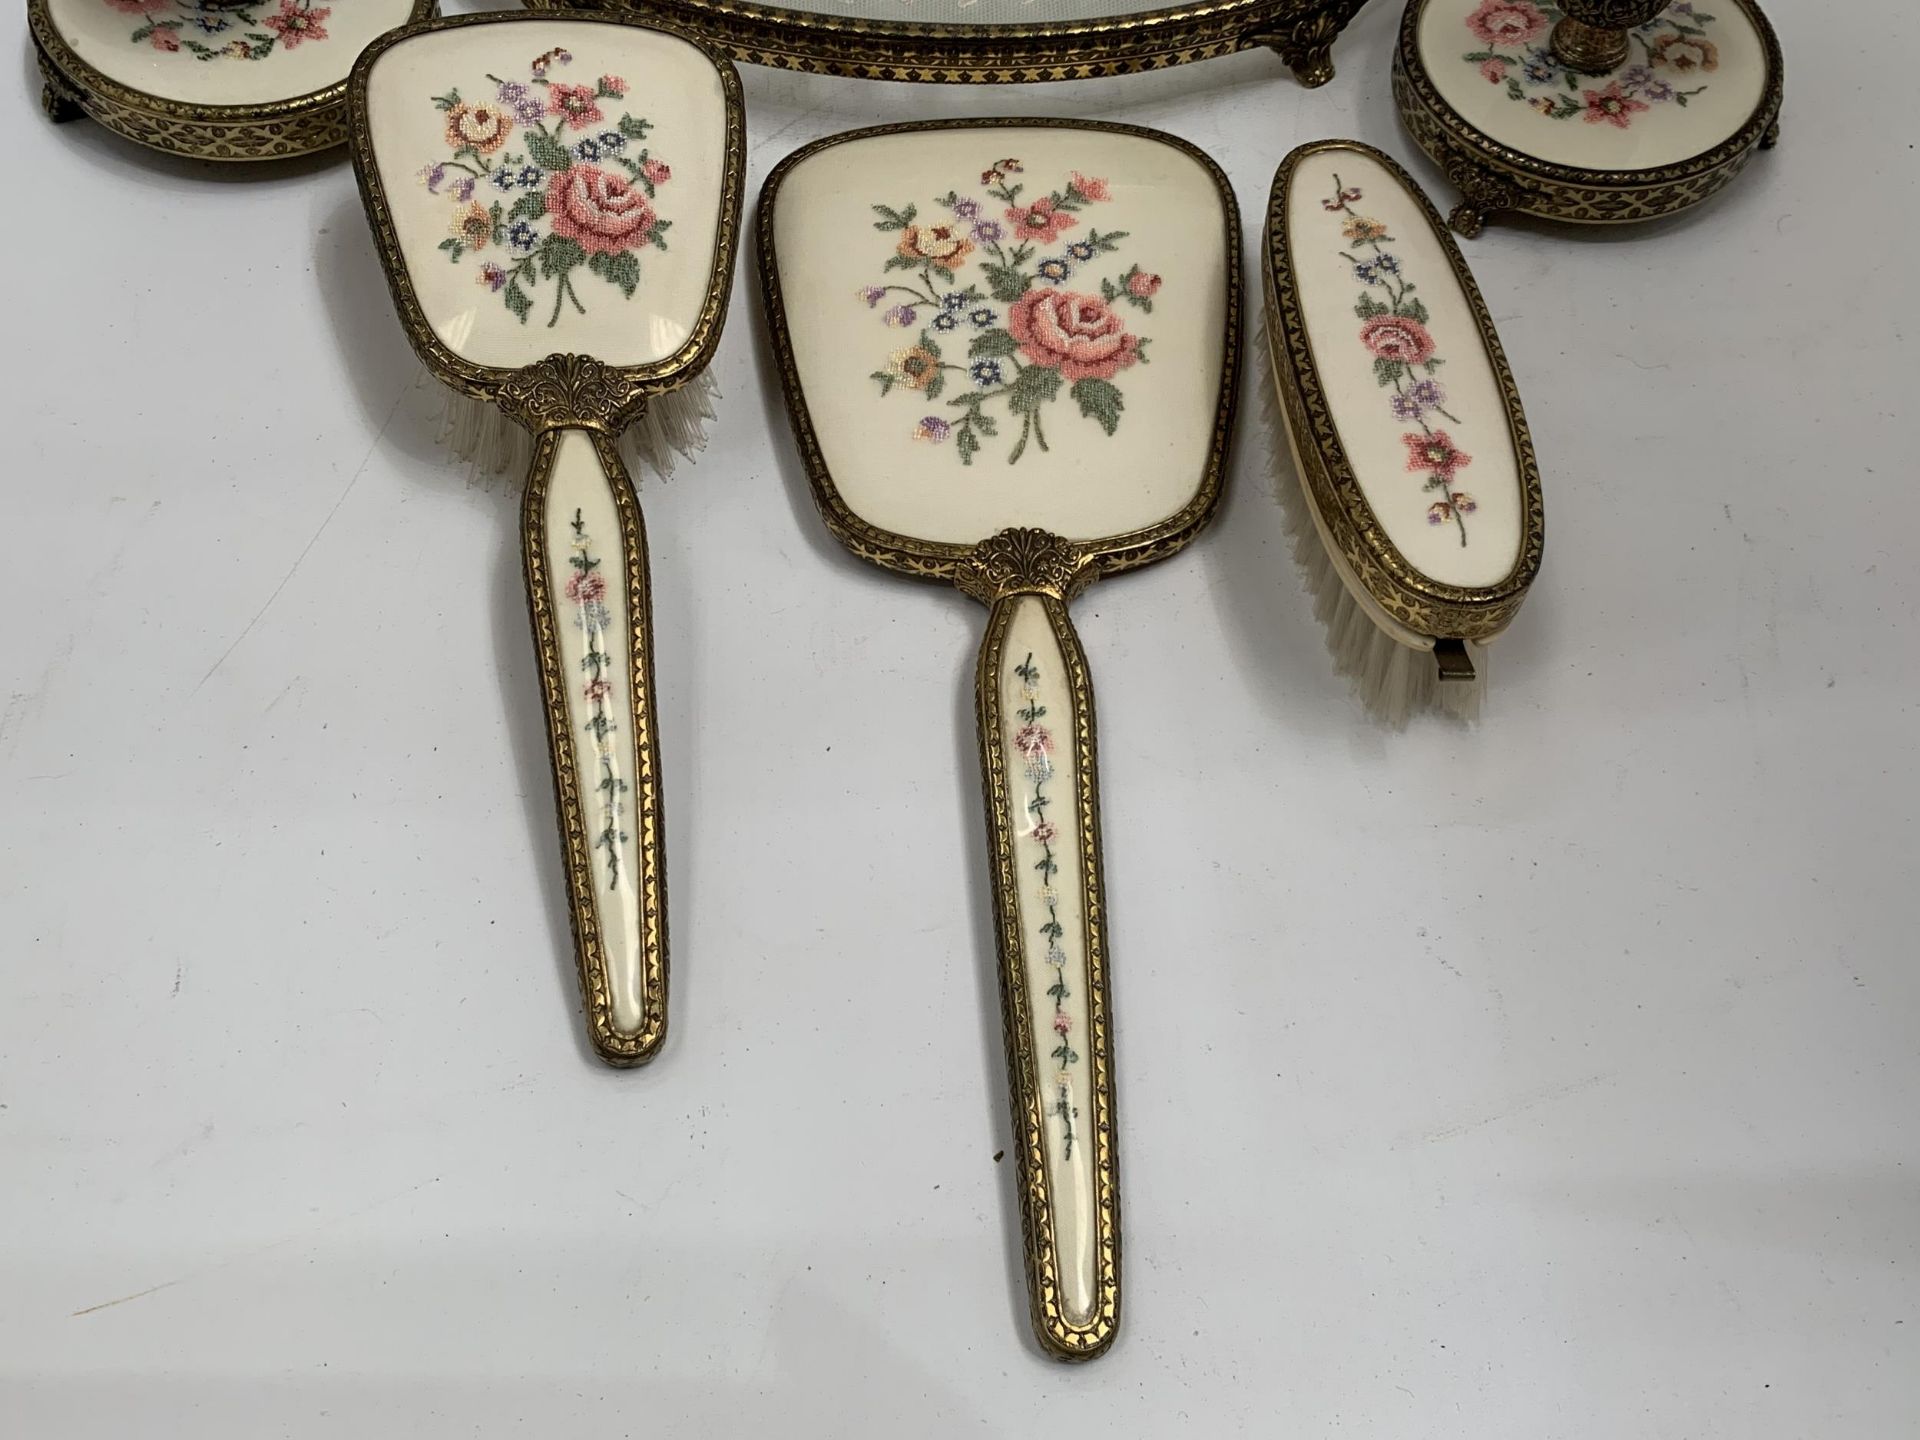 A VINTAGE FLORAL EMBROIDERED DRESSING SET WITH TRAY AND CANDLESTICKS ETC - Image 4 of 4